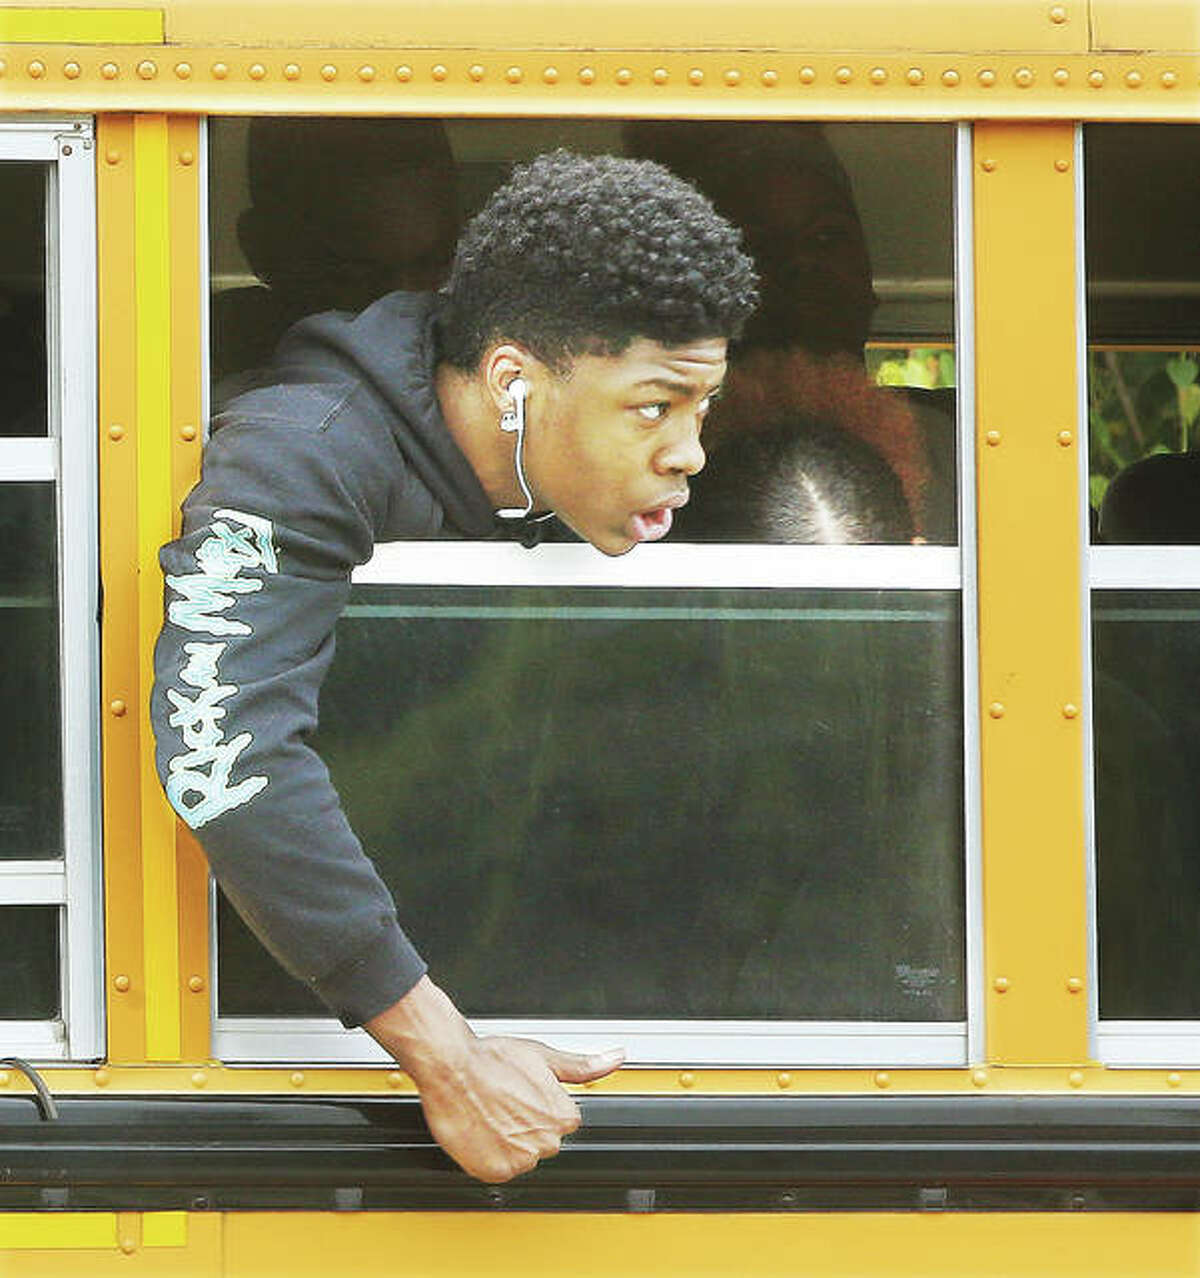 One of many Alton High School students on a bus in an accident involving a Nissan Rogue and a motorcyclist on Wednesday watches as firefighters take the male motoryclist to Alton Memorial Hospital where an ARCH Air Medical Services Inc. helicopter met them. The motoryclist appeared to be in serious condition at the scene. None of the students on the school bus were injured.